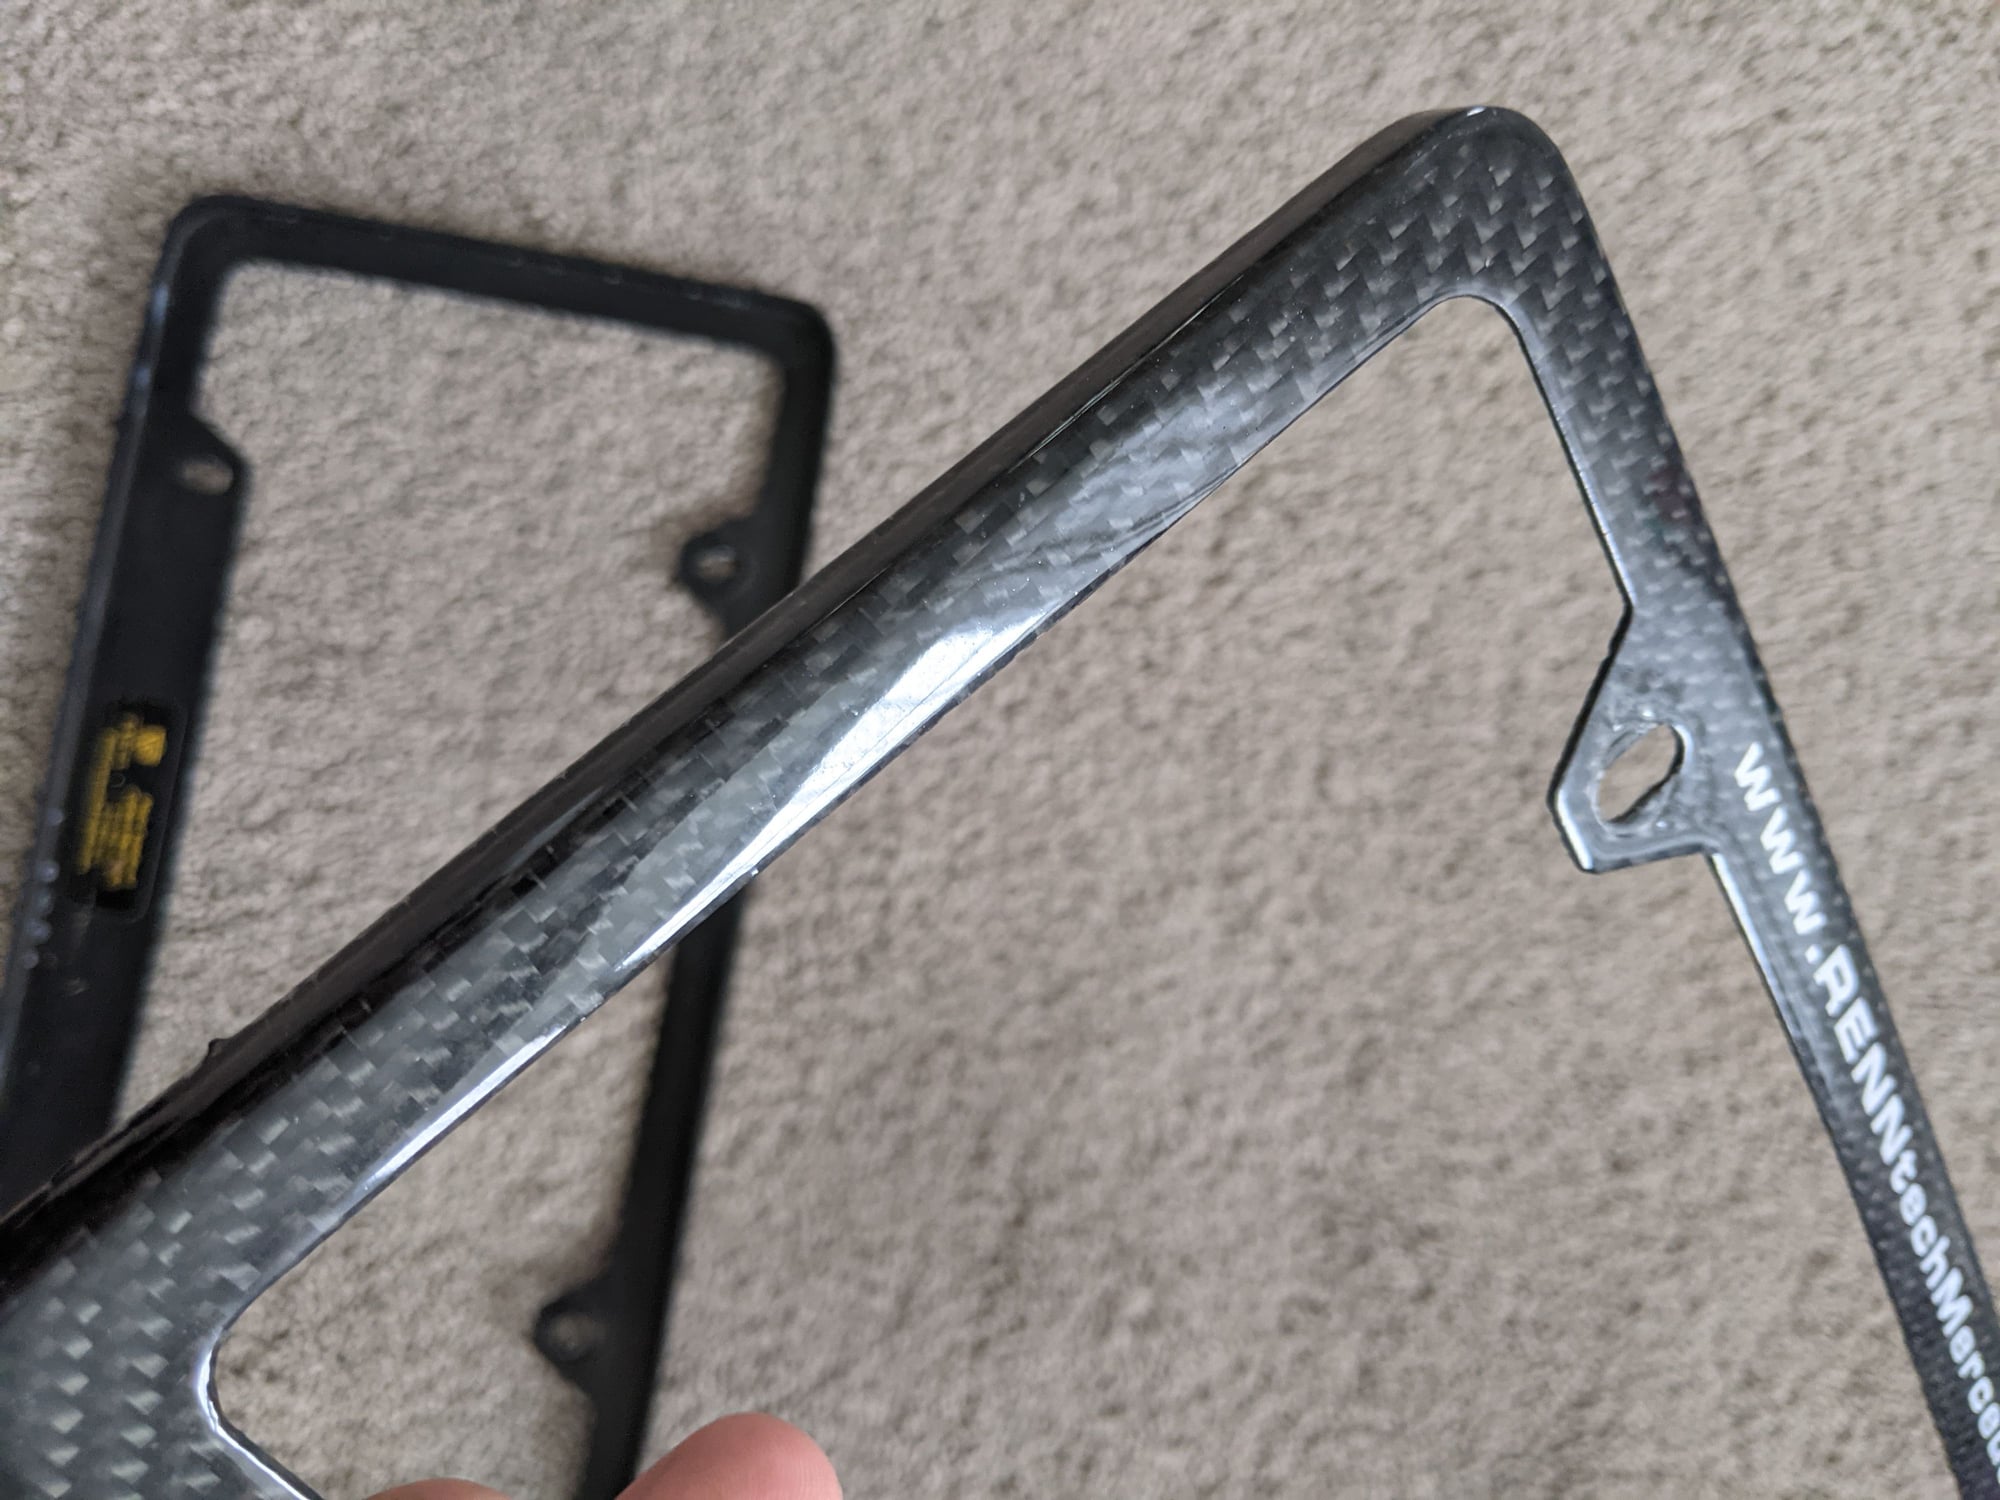 Accessories - RennTech Carbon Fiber License Plate Frames - Used - All Years Any Make All Models - Clifton, VA 20124, United States